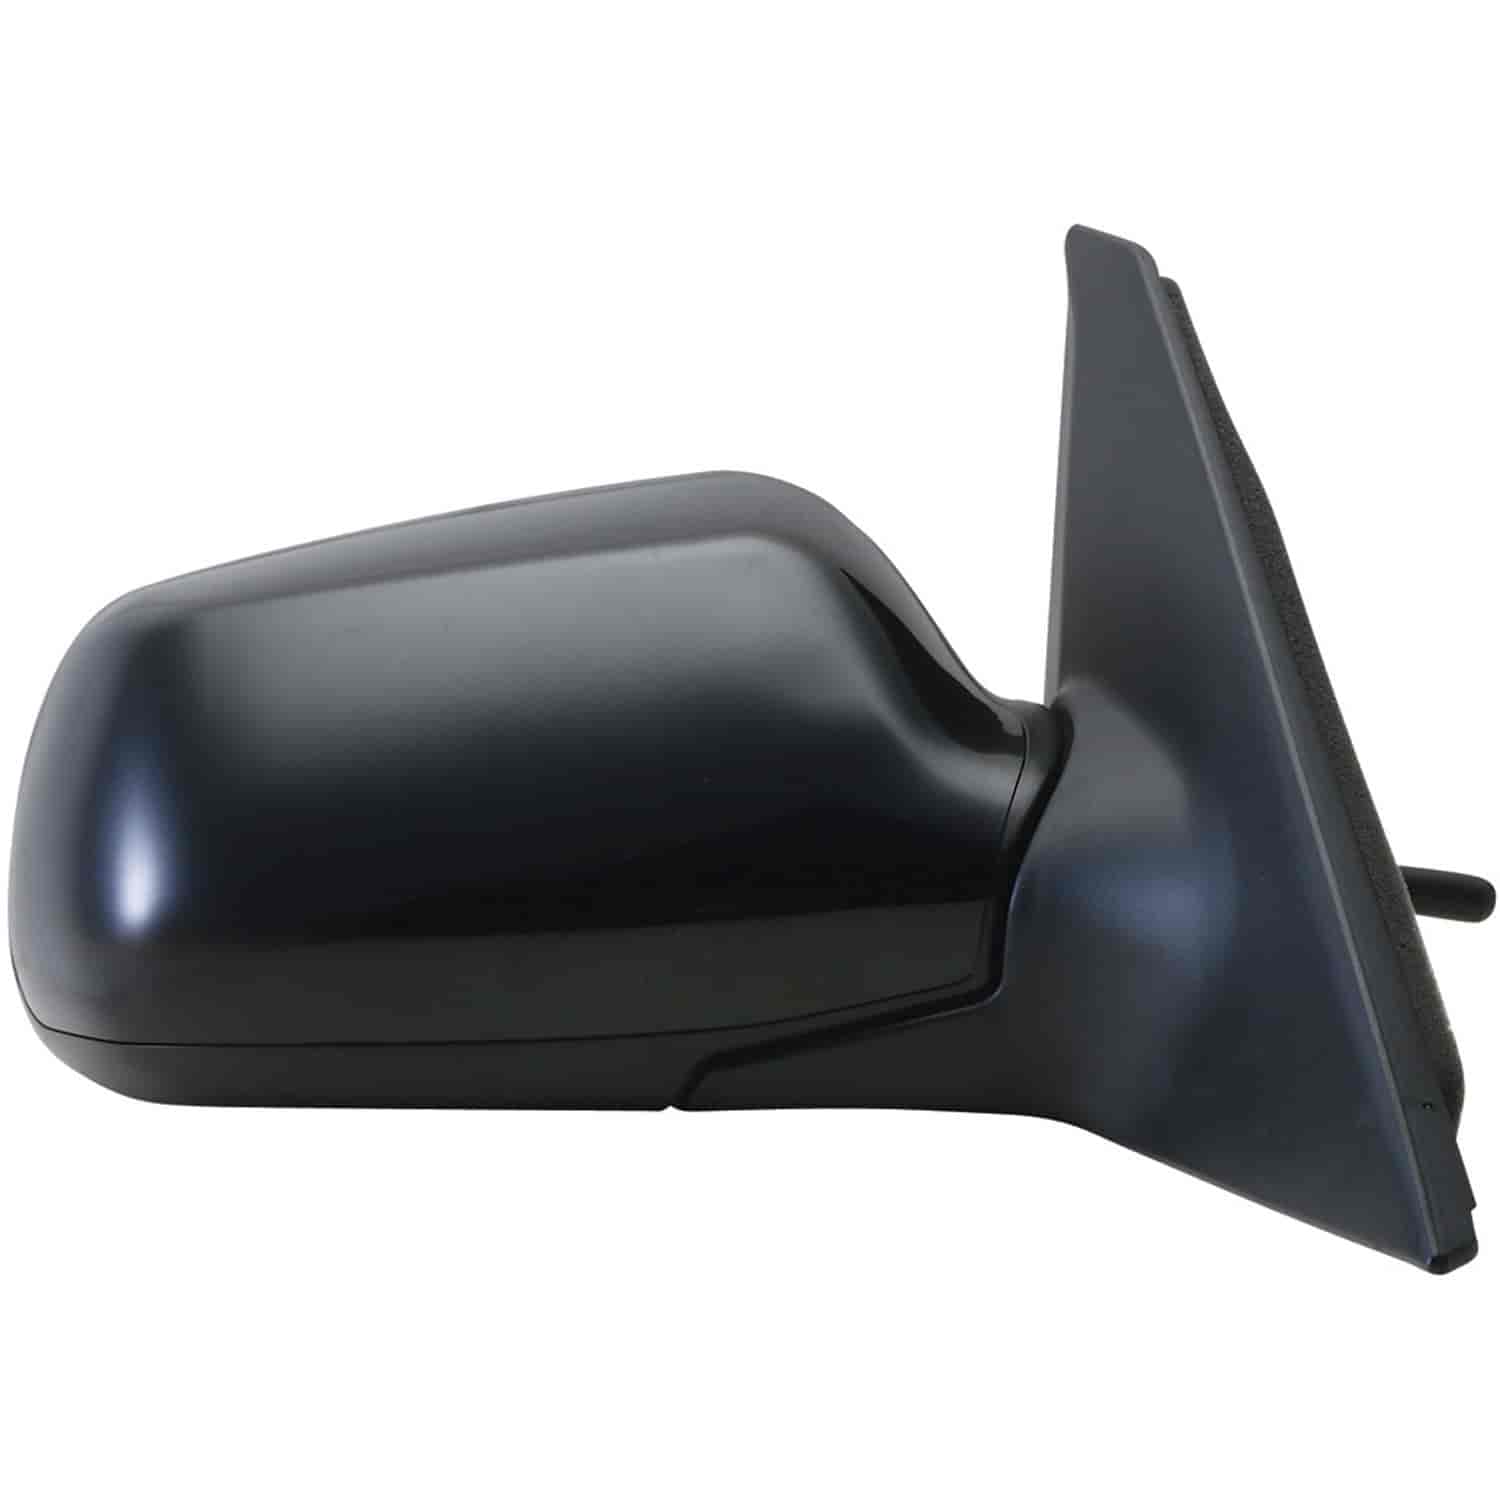 OEM Style Replacement mirror for 04-09 Mazda 3 passenger side mirror tested to fit and function like